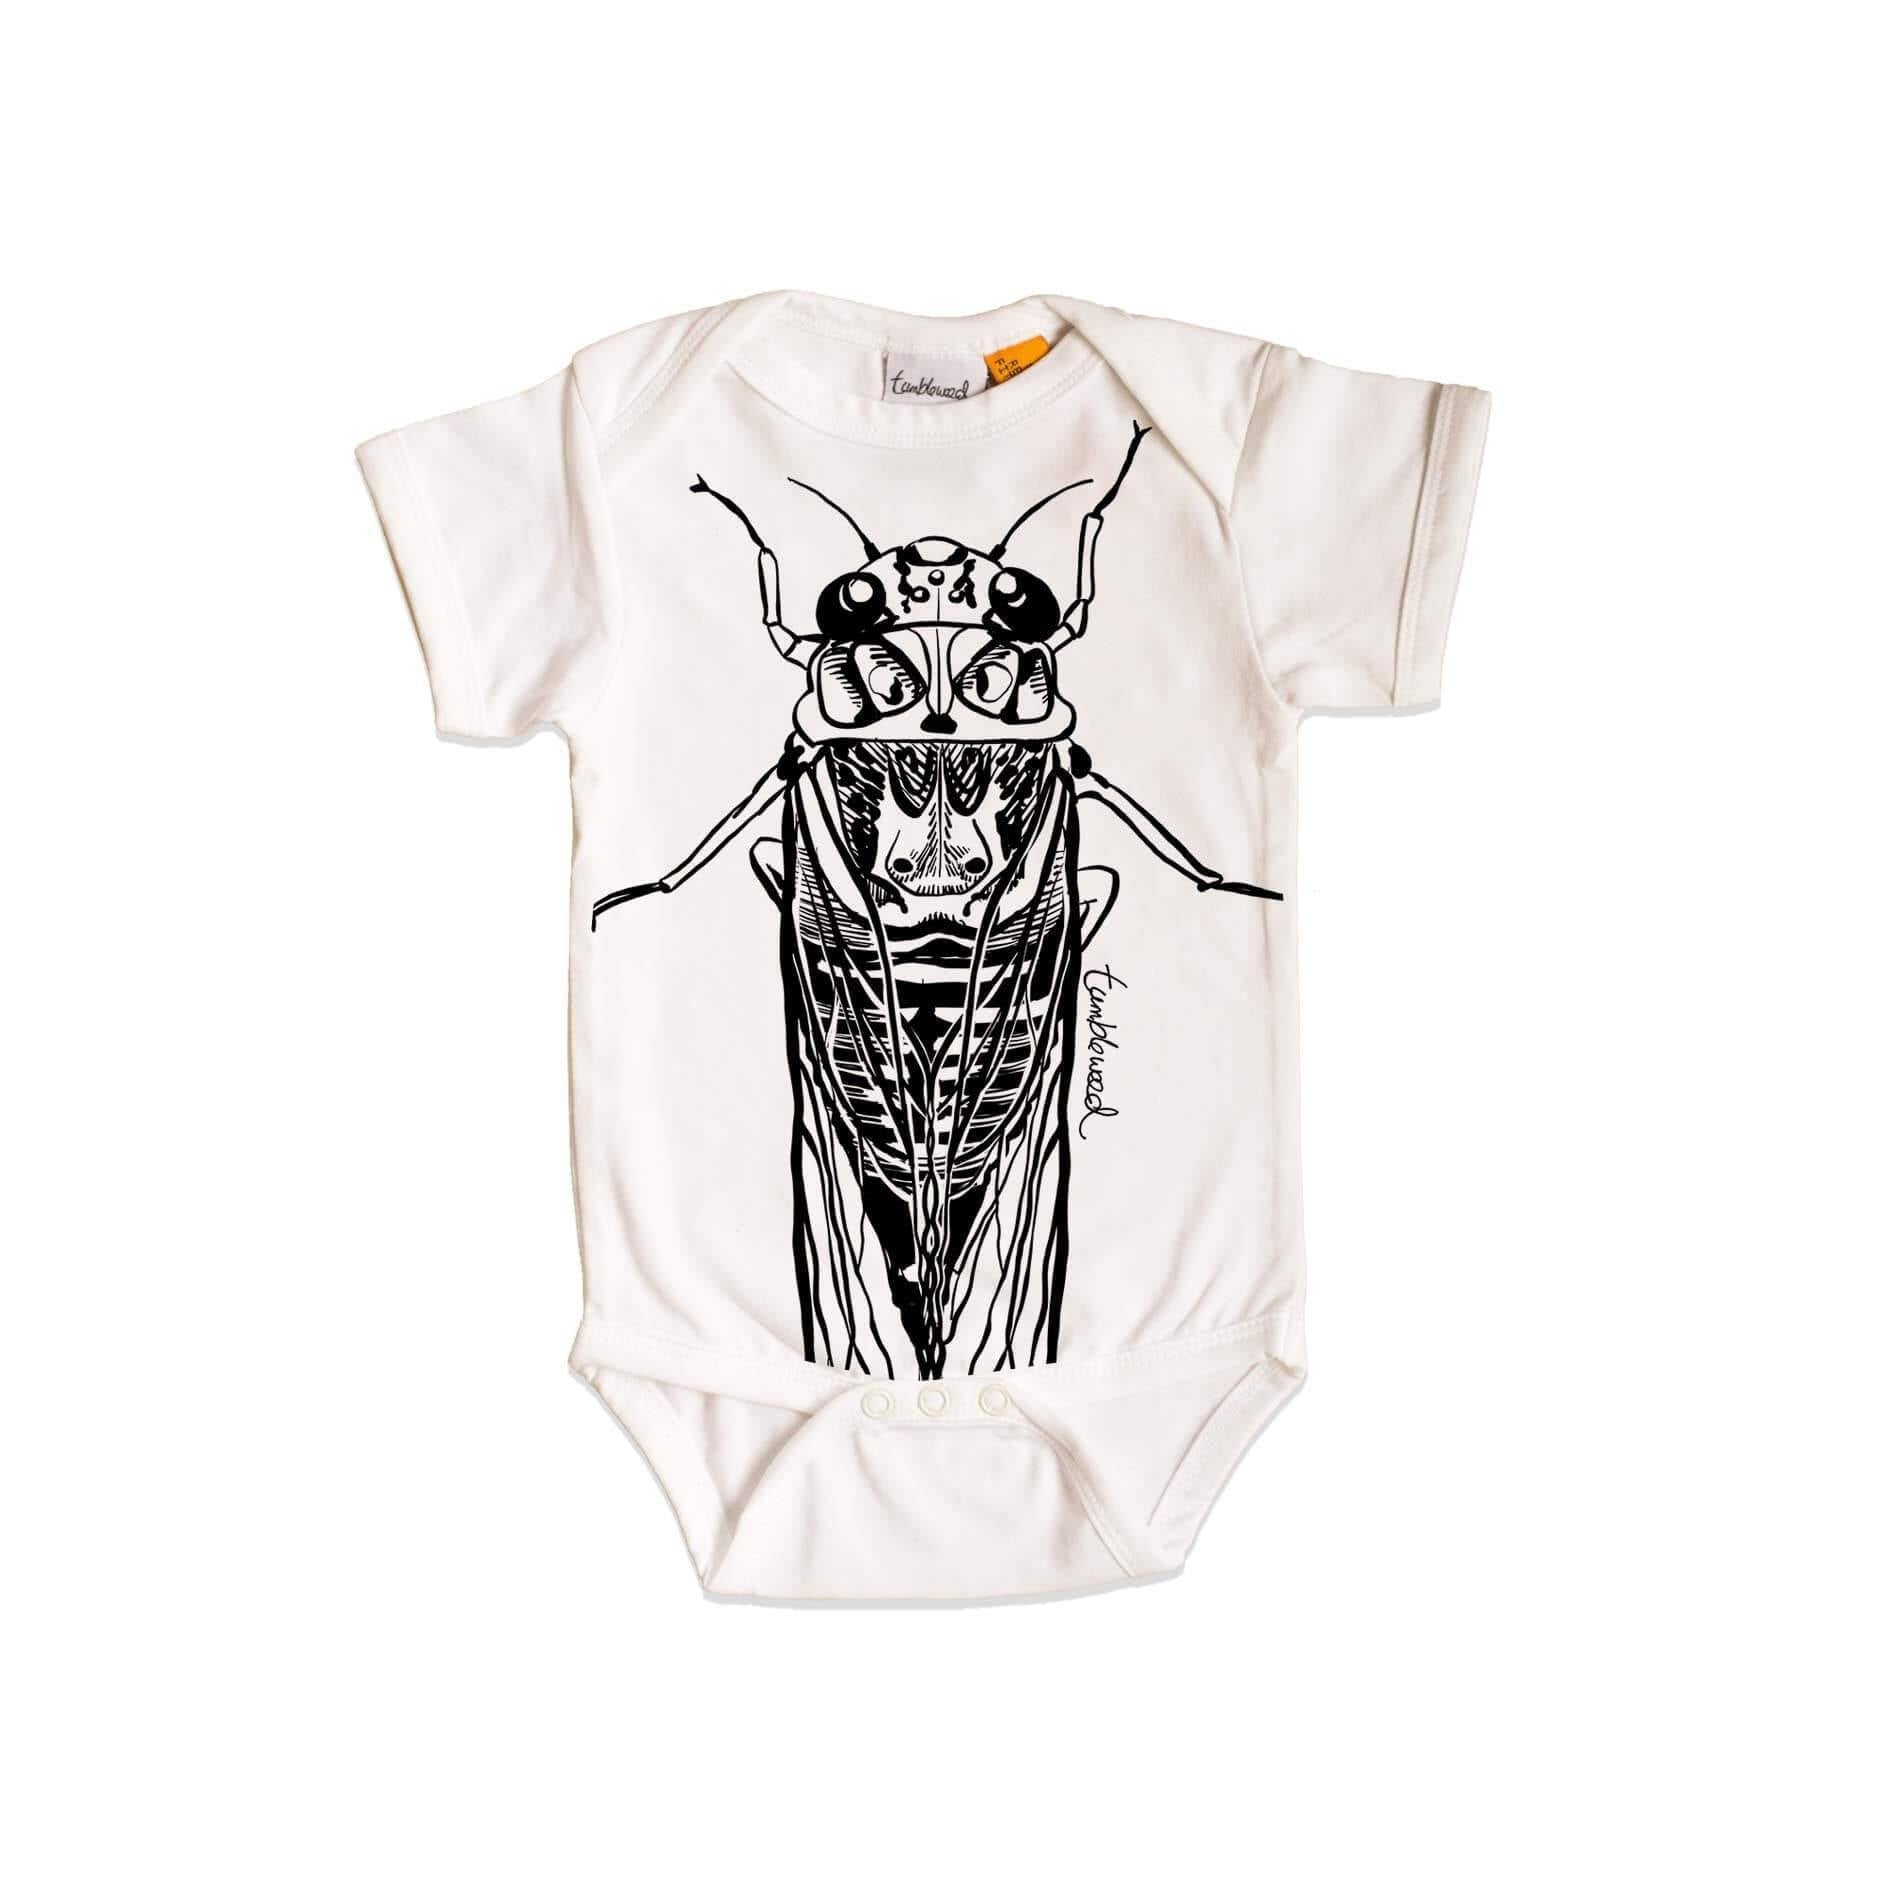 Short sleeved, white, organic cotton, baby onesie featuring a screen printed Cicada design.